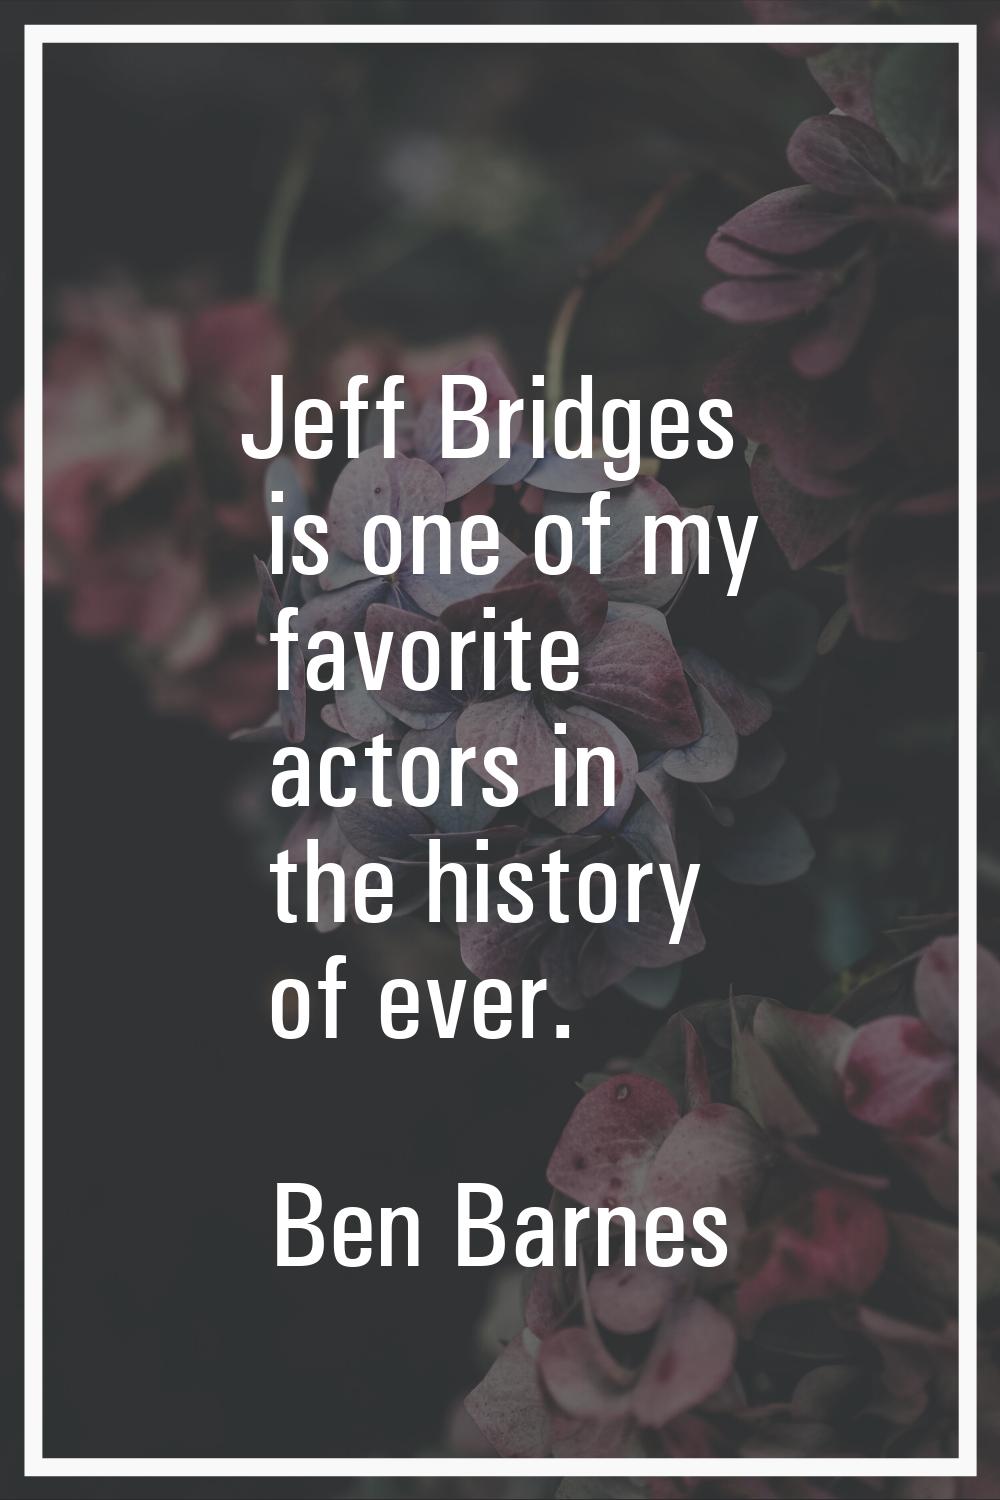 Jeff Bridges is one of my favorite actors in the history of ever.